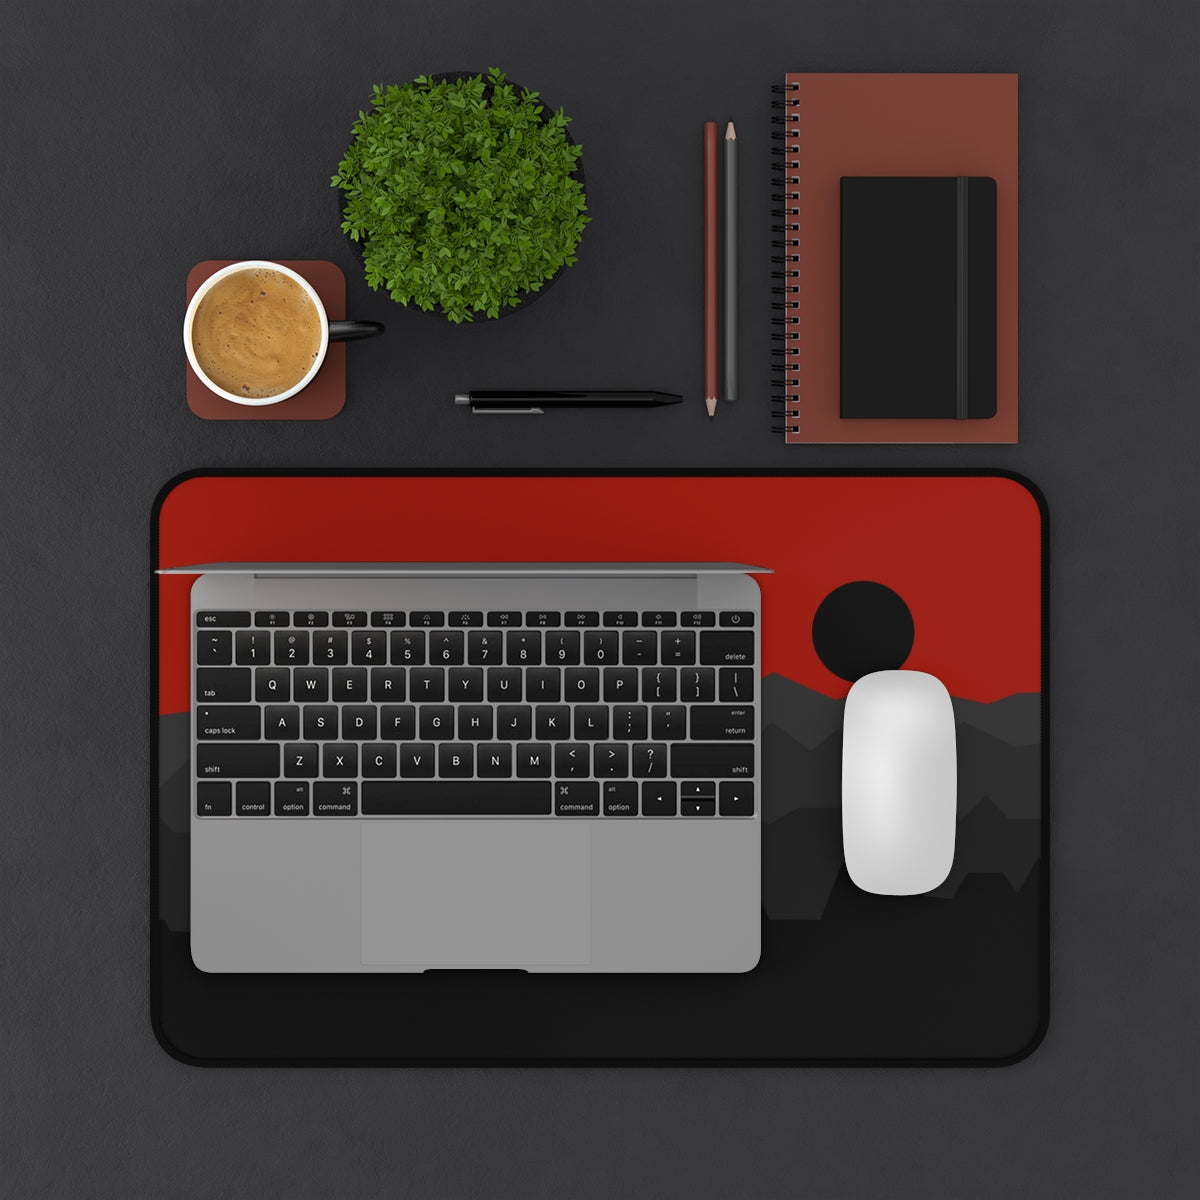 Black & Red Abstract Mountains Desk Mat - Desk Cookies